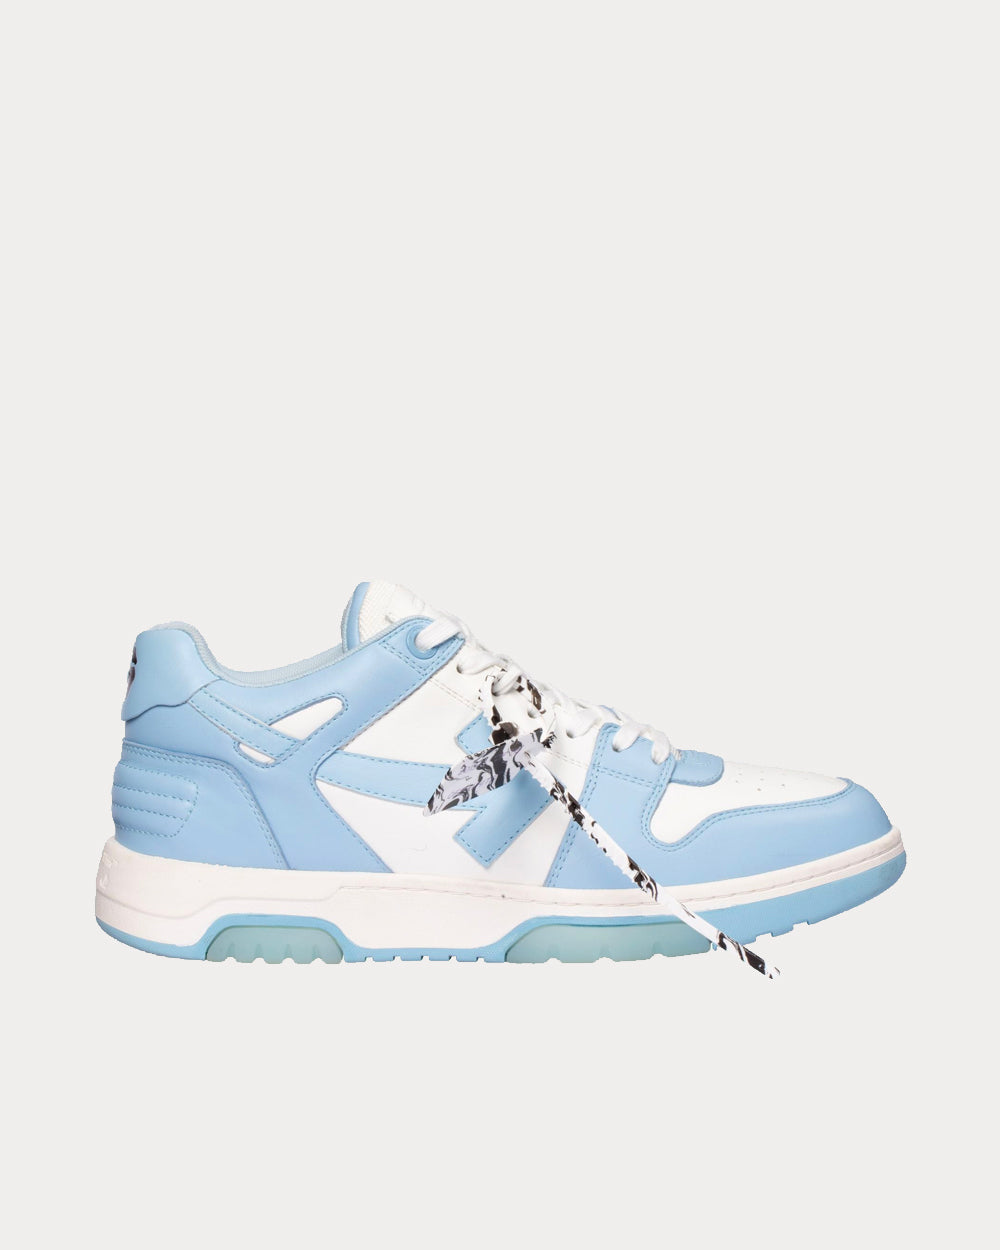 OFF-WHITE Out Of Office OOO Low Tops Navy Blue White Blue